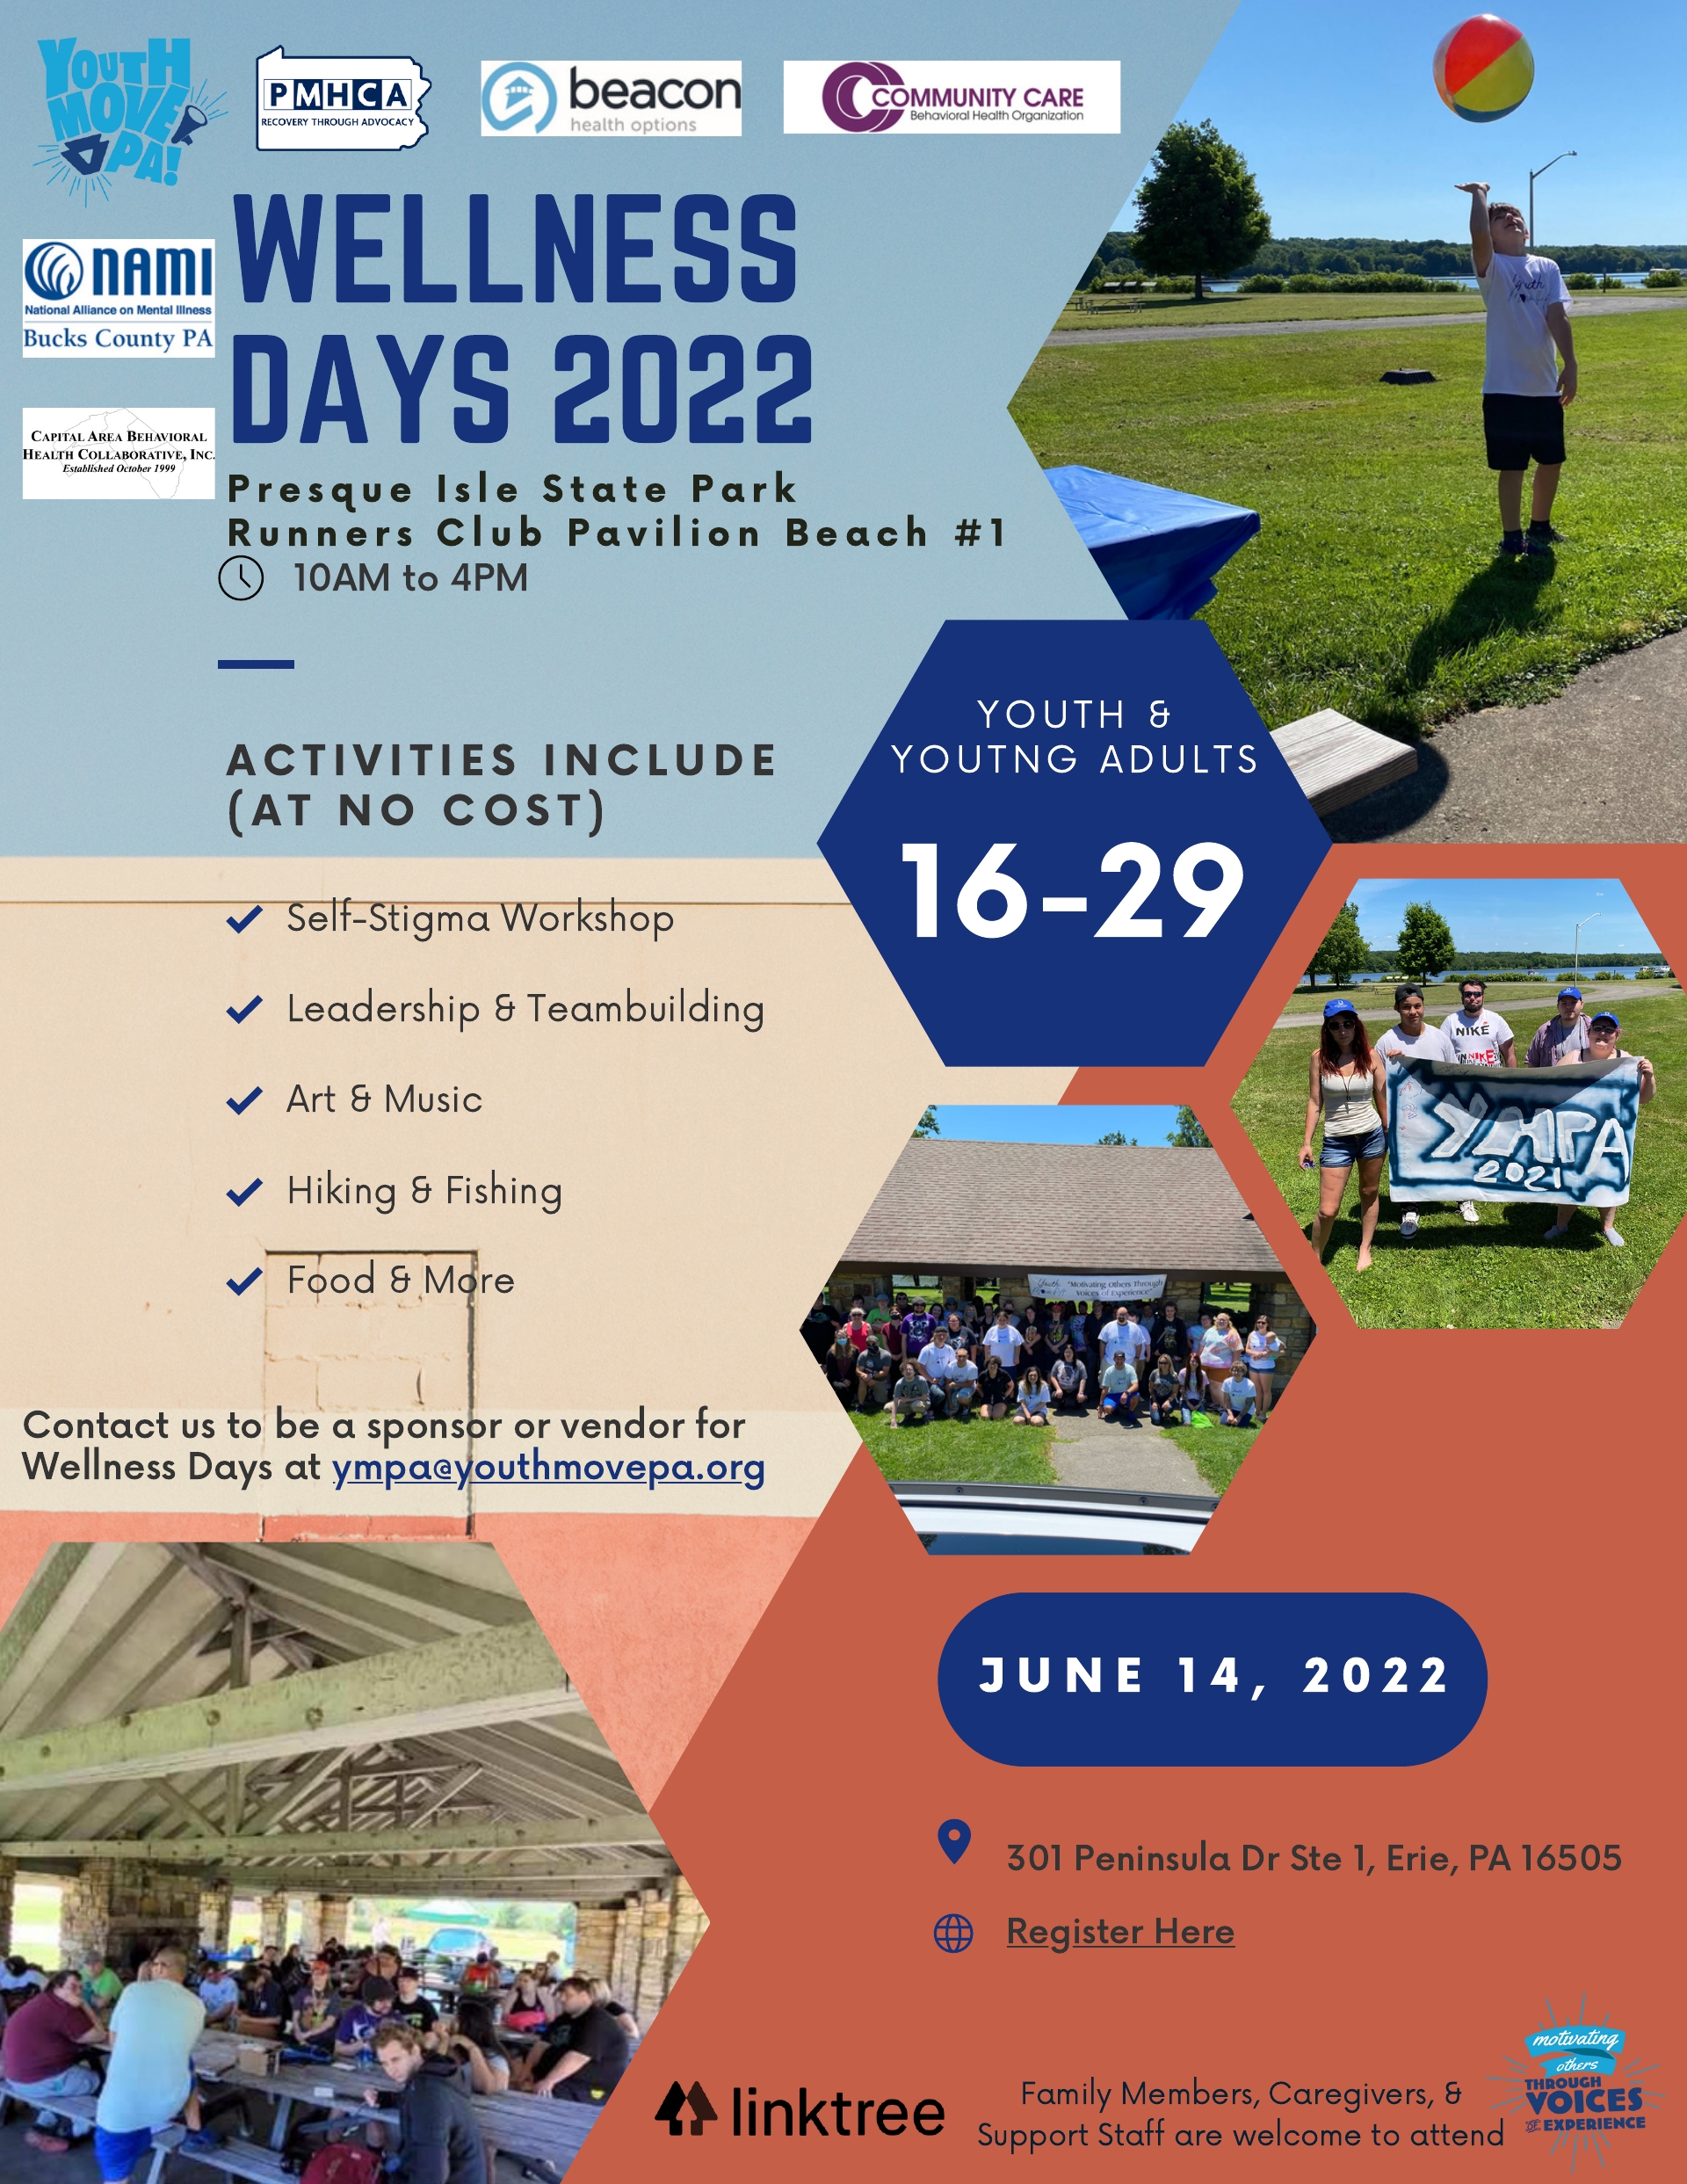 WELLNESS DAYS 2022 ACTIVITIES INCLUDE (AT NO COST) Youth Move Presents June 14, 2022, 10 am to 4 pm